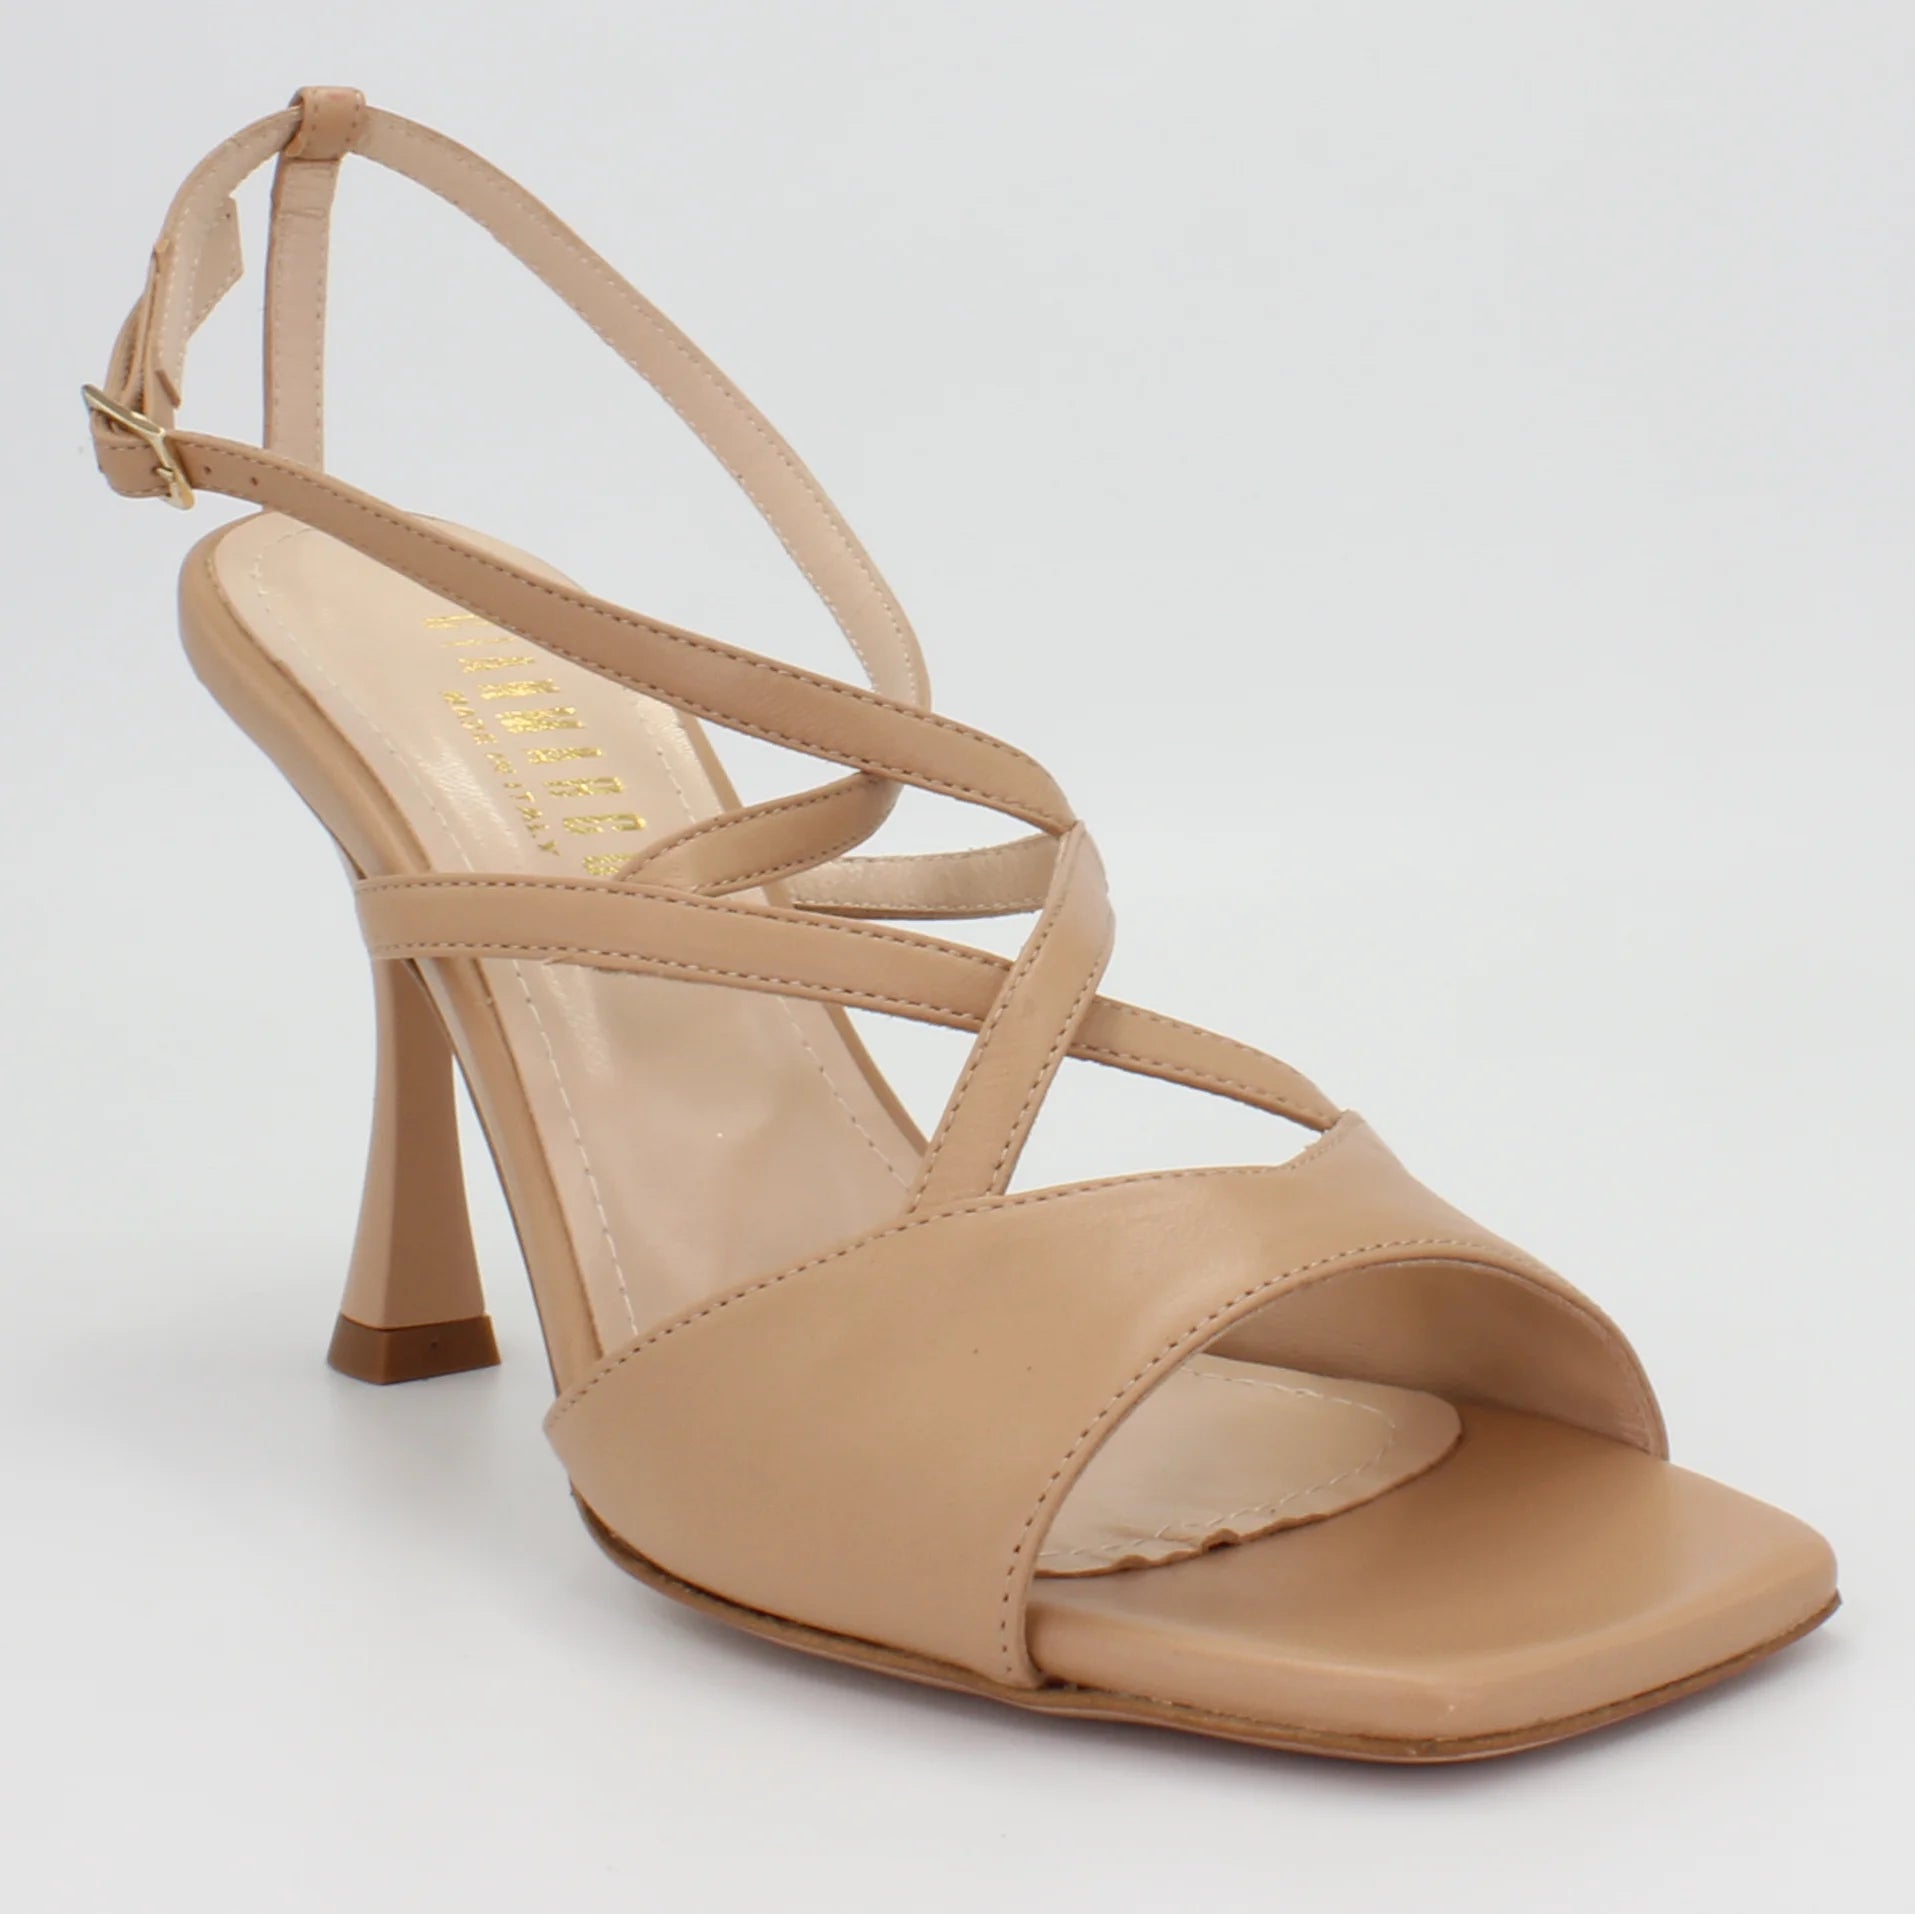 Shop Handmade Italian Leather Strappy High Heels in Nude (M864) or browse our range of hand-made Italian shoes for women in leather or suede in-store at Aliverti Cape Town, or shop online. We deliver in South Africa & offer multiple payment plans as well as accept multiple safe & secure payment methods.